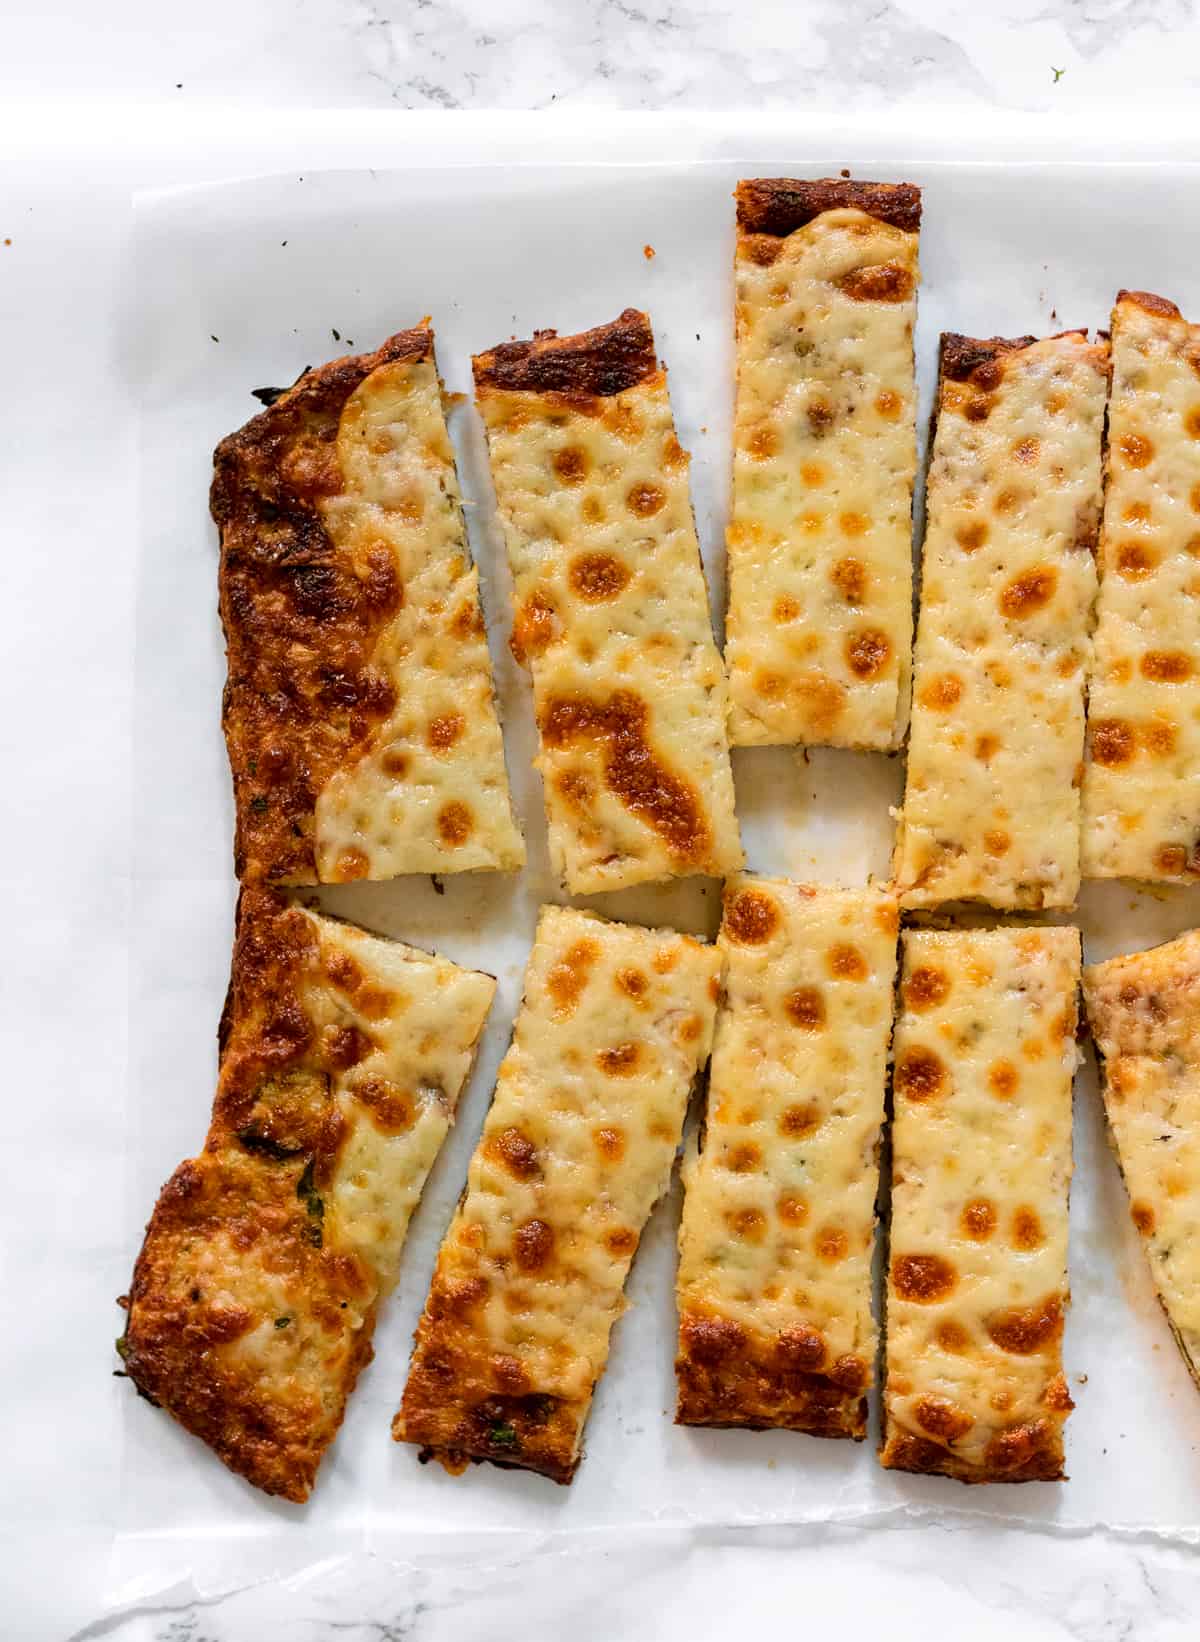 Cheesy Cauliflower Breadsticks are a gluten free and low carb alternative to traditional breadsticks. They are easy to make and packed full of flavor!